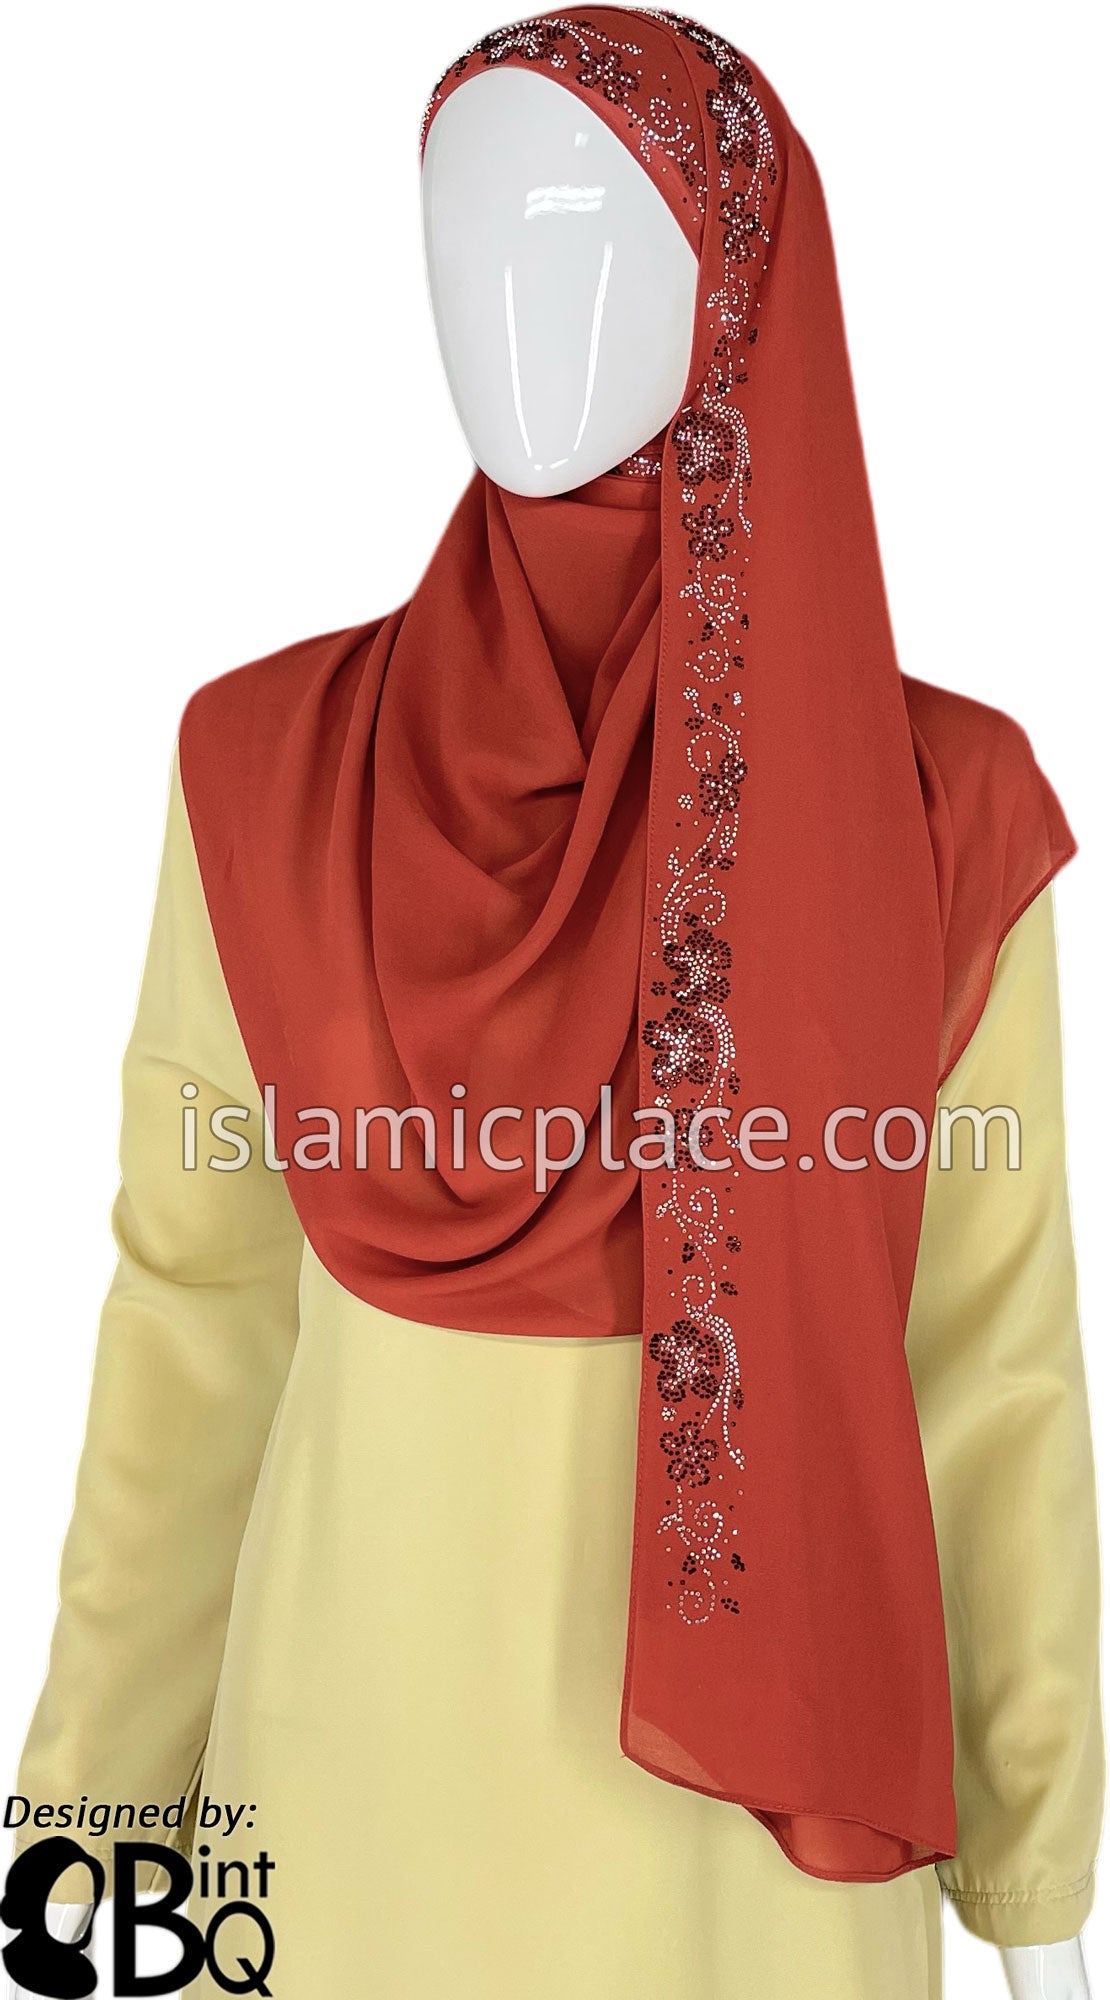 Rust with Black-Silver Stones in Design 54 - Georgette Chiffon Shayla Long Rectangle Hijab 30"x70"